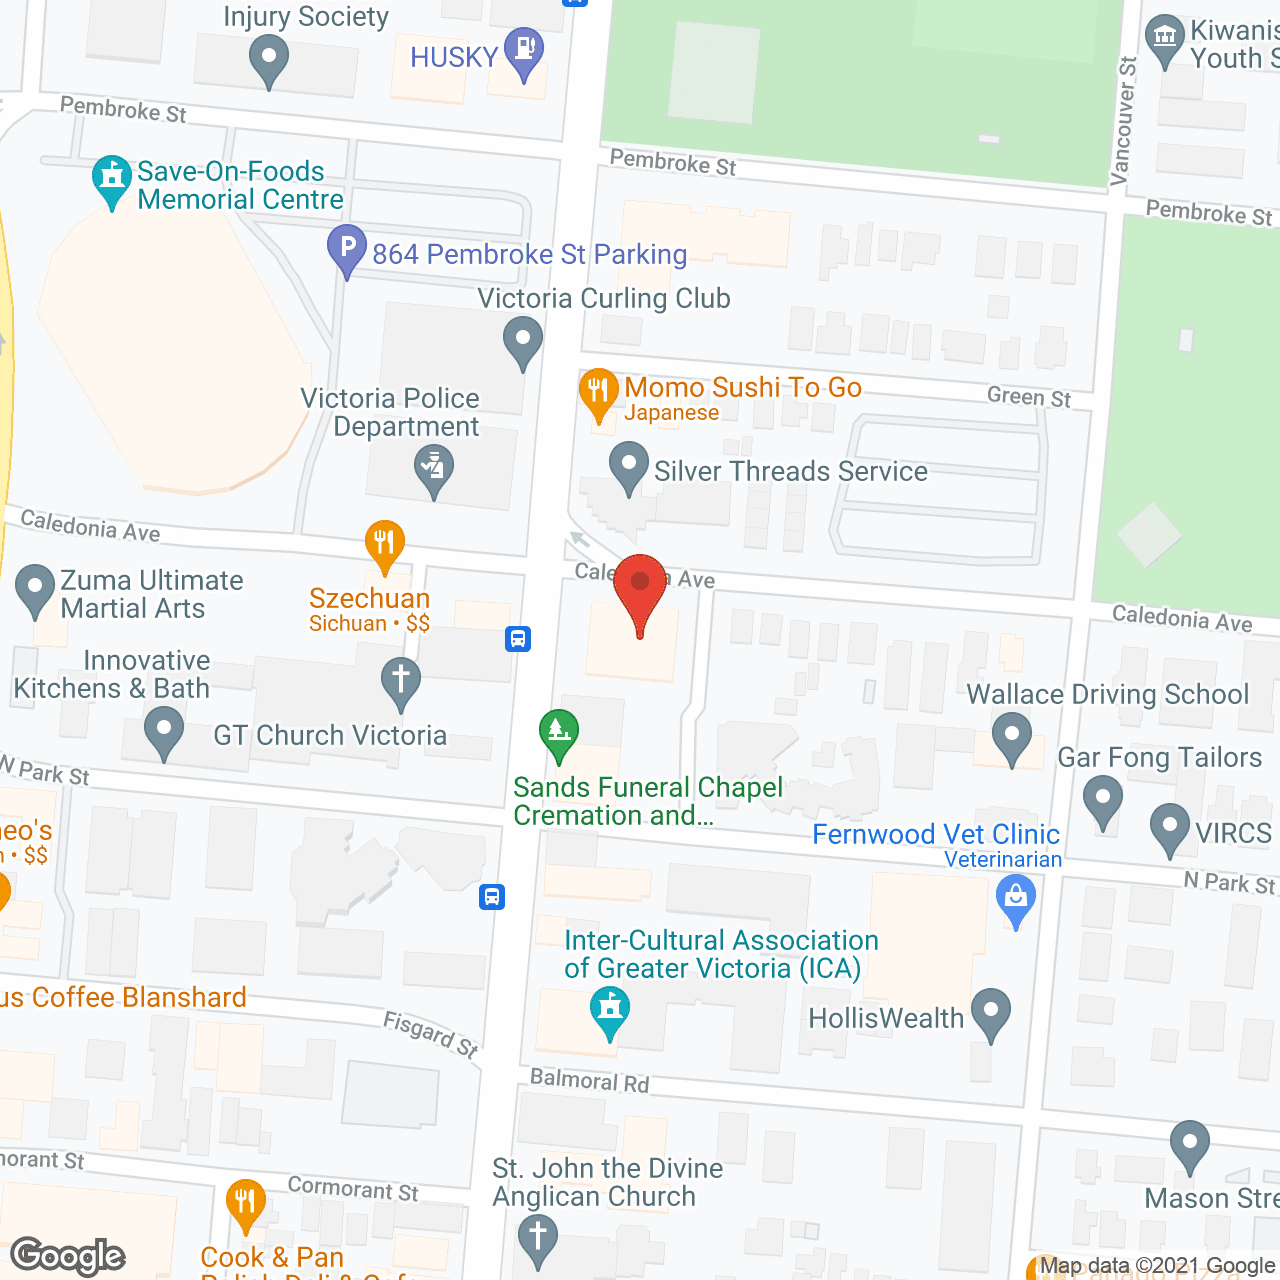 Rotary House in google map